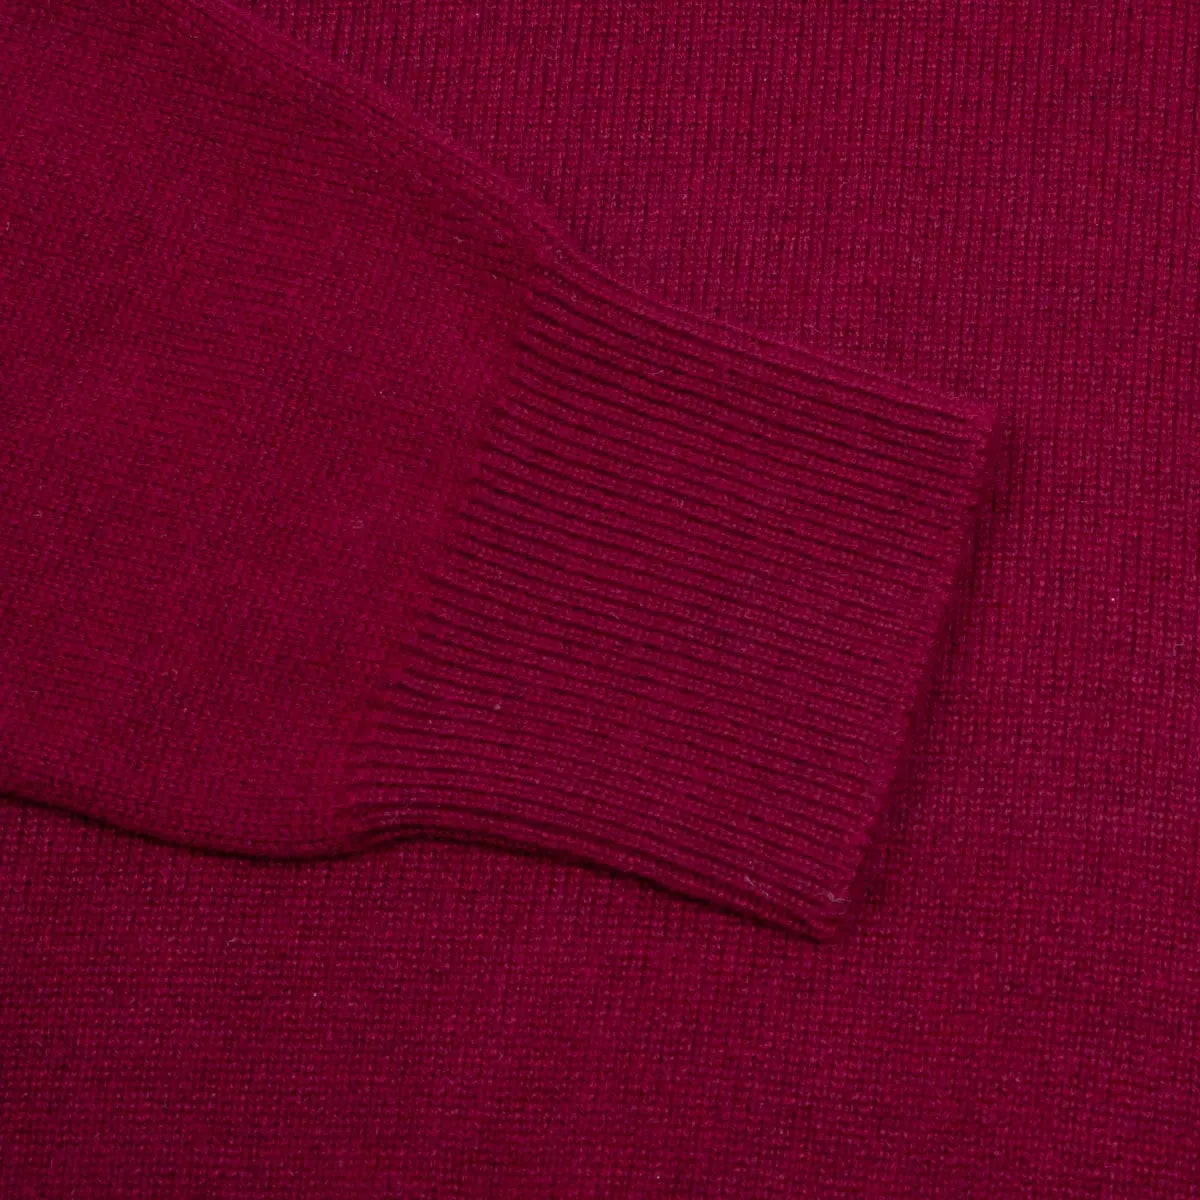 Claret Red Tobermorey 4ply V-Neck Cashmere Sweater Robert Old